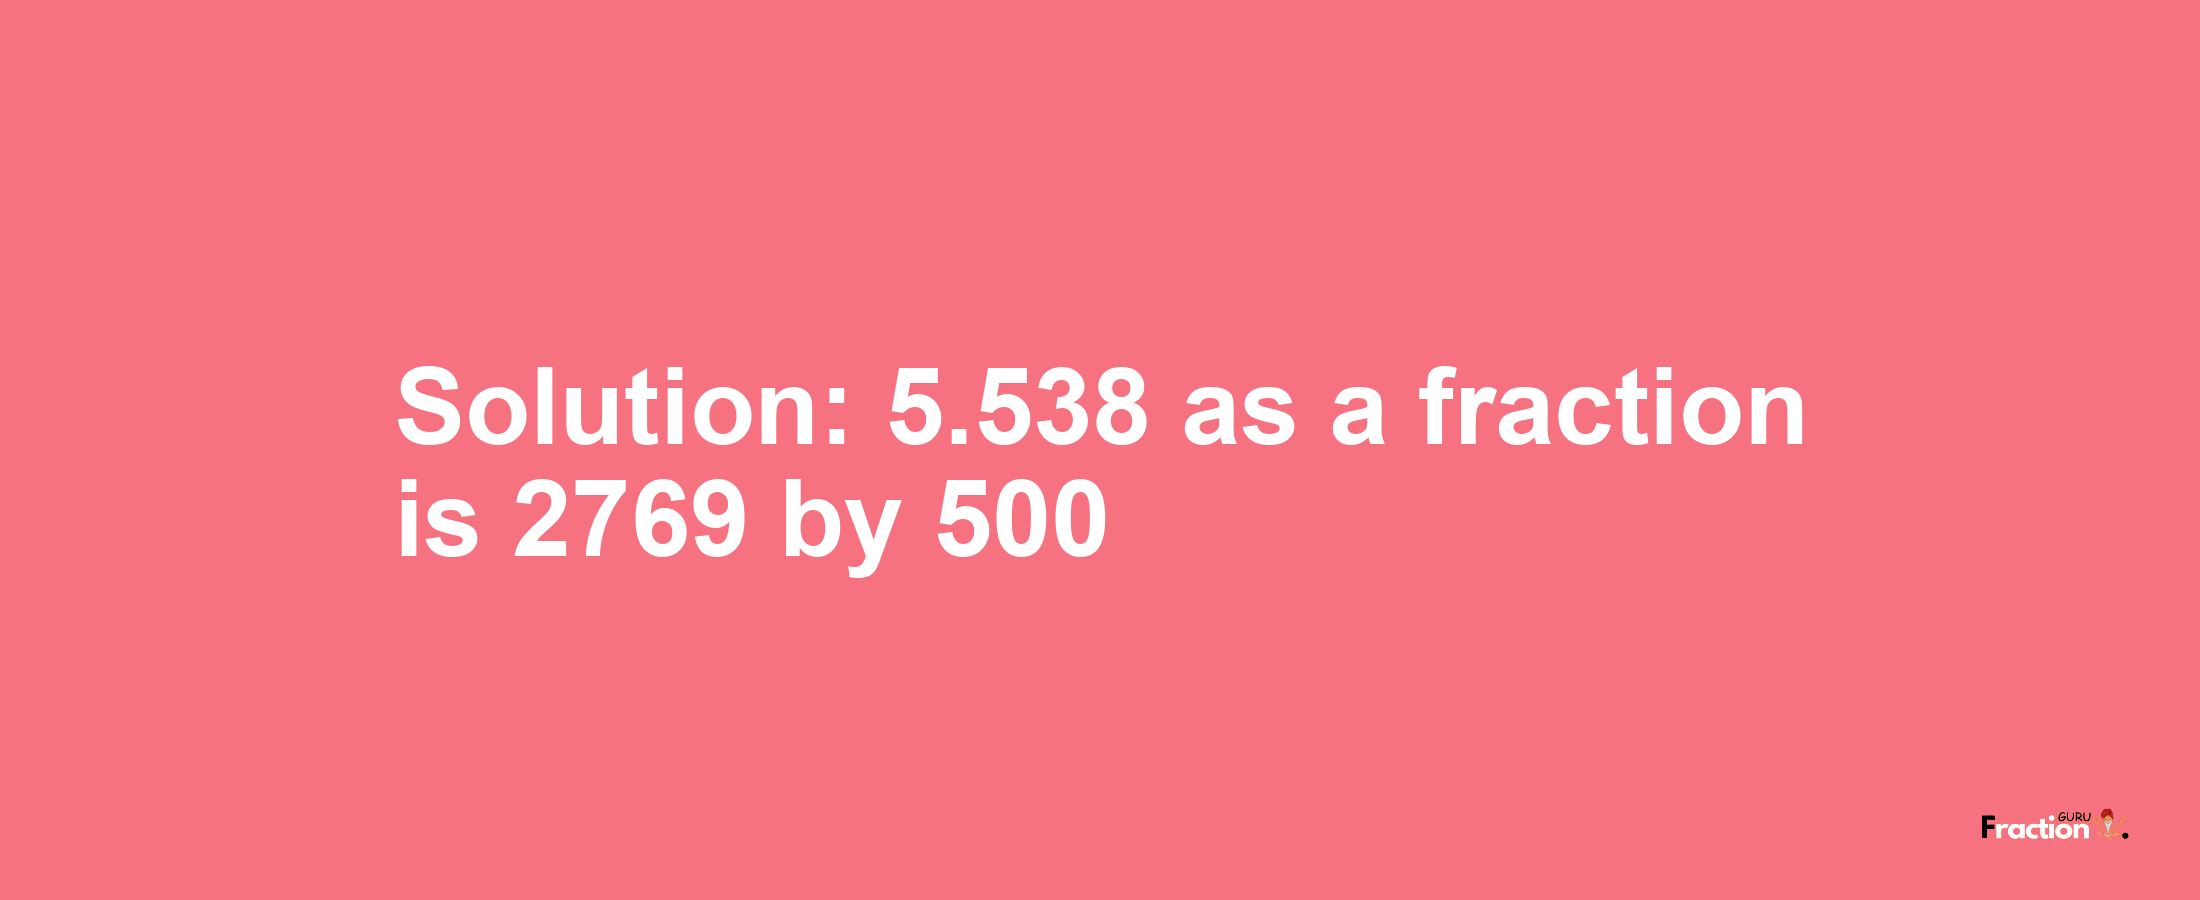 Solution:5.538 as a fraction is 2769/500